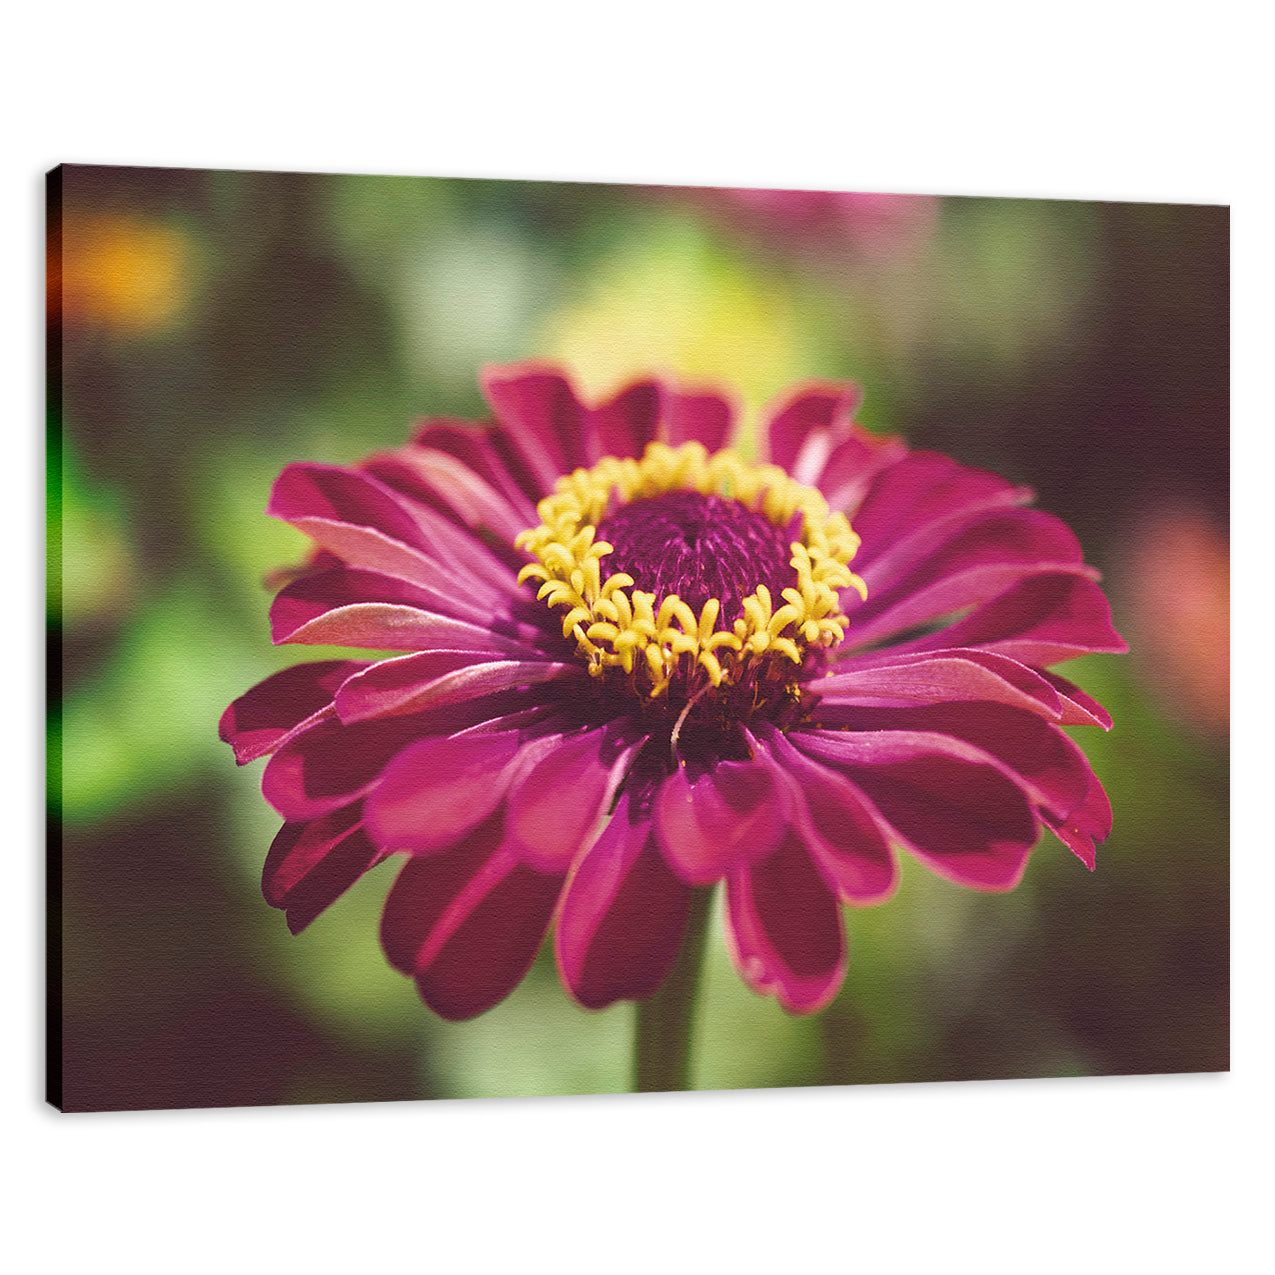 Moody Young-And-Old Age Pink Zinnia Flower Bloom Fine Art Canvas Wall Art Prints  - PIPAFINEART